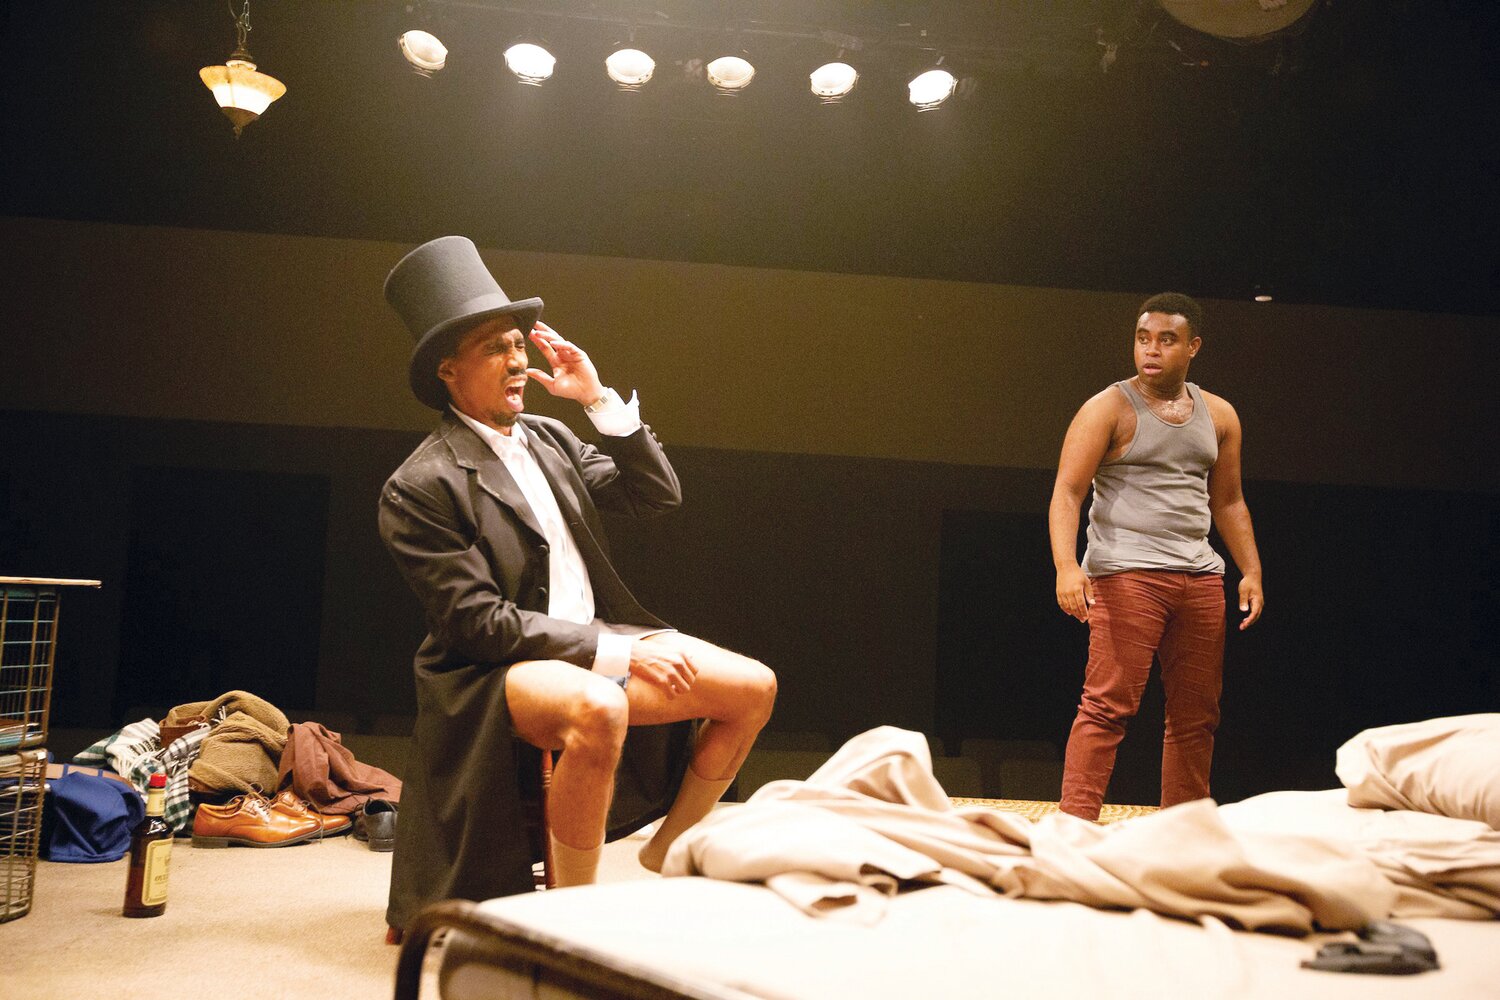 Anthony T. Goss as Lincoln and Marc Pierre as Booth give powerful performances in Gamm's “Topdog/Underdog.”